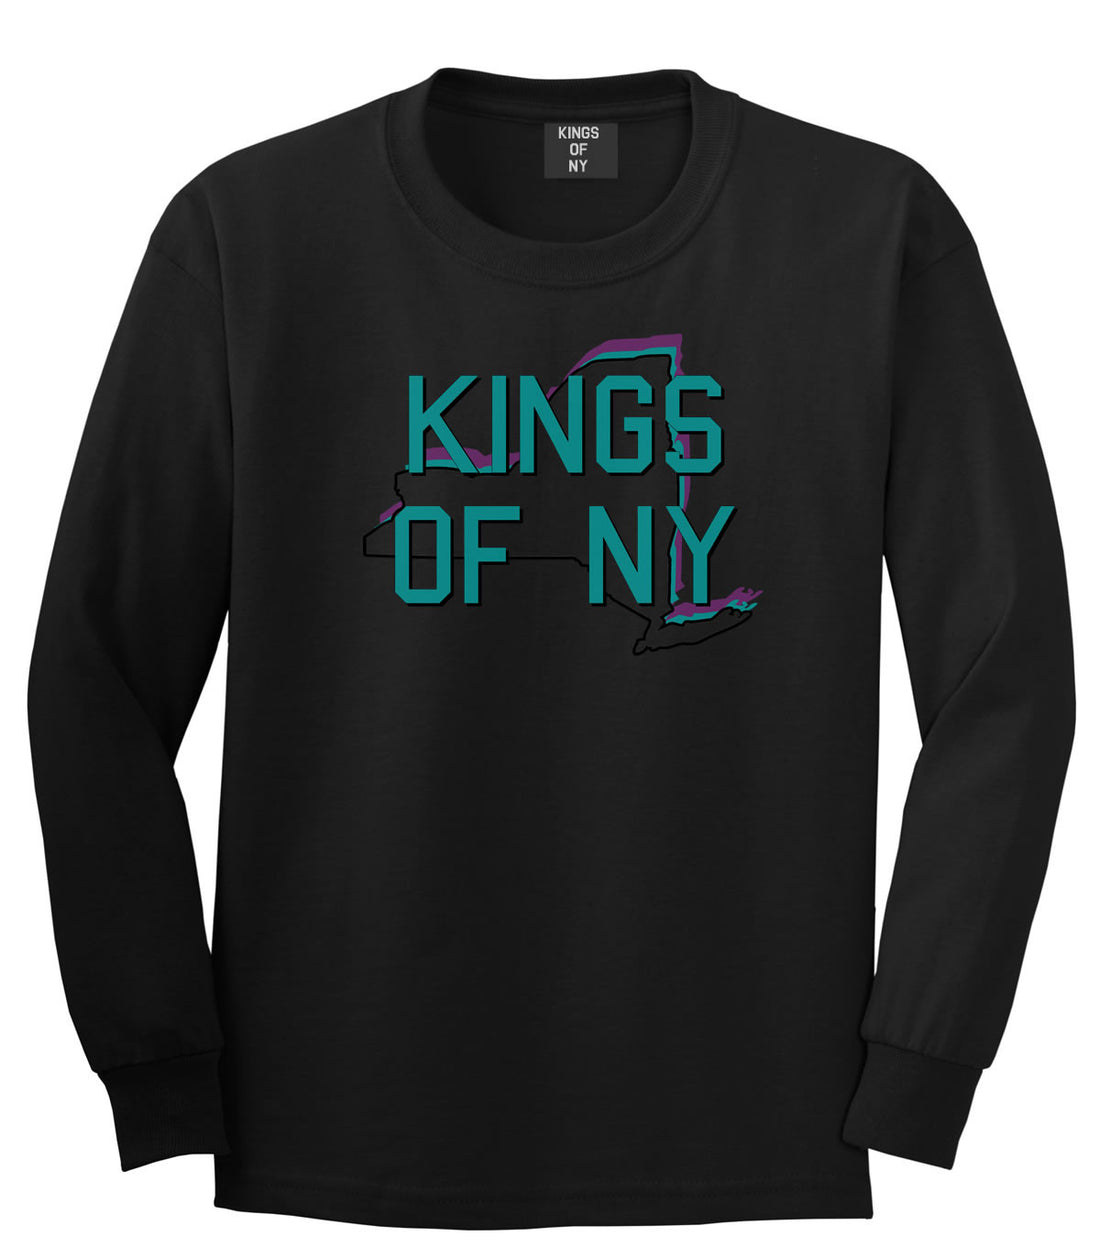 New York State Outline Boys Kids Long Sleeve T-Shirt in Black by Kings Of NY